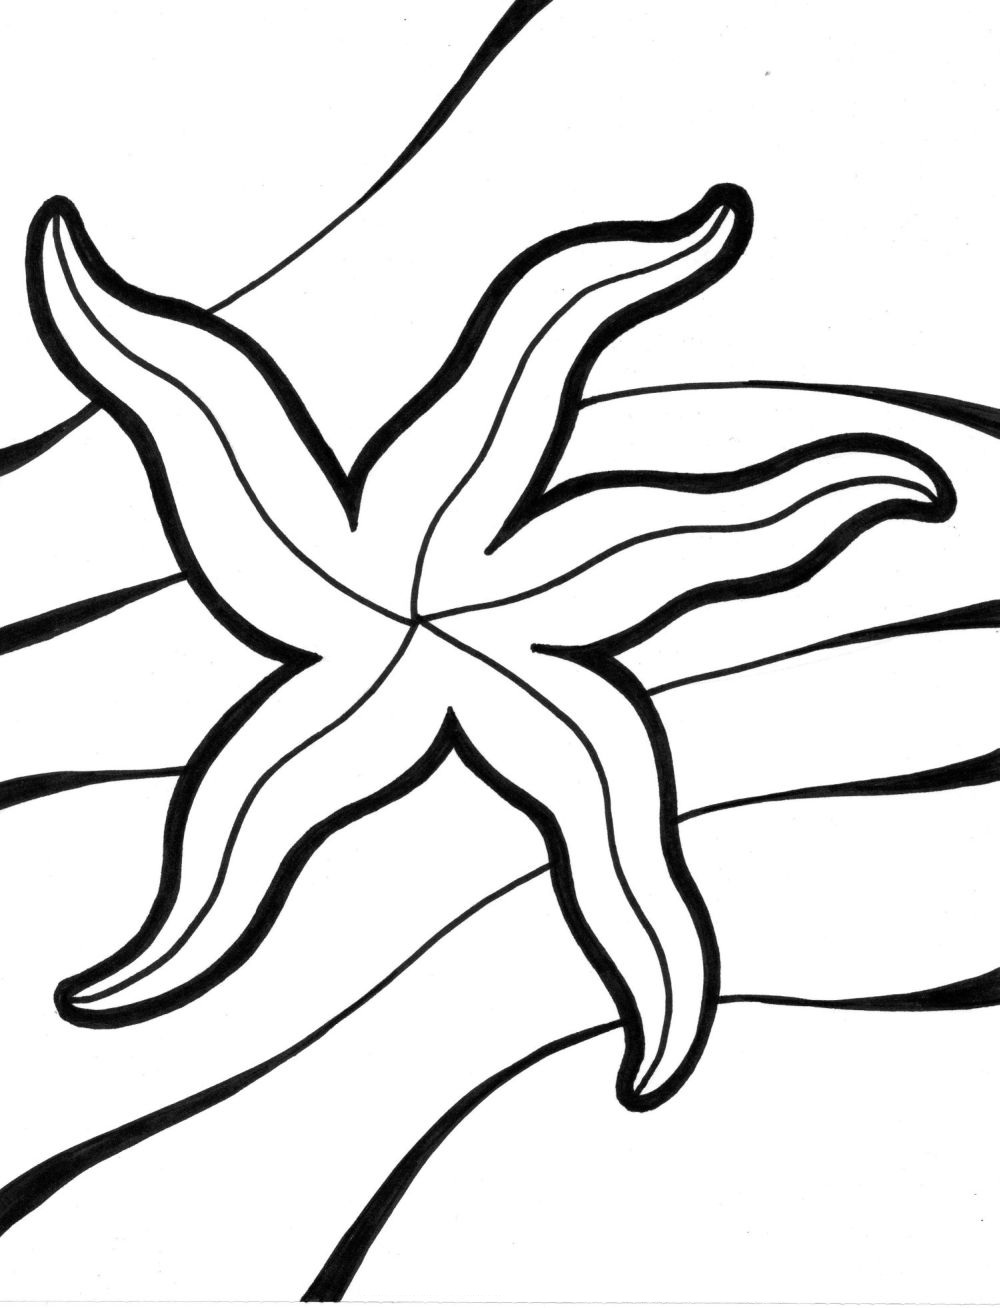 Star Fish Outline - ClipArt Best